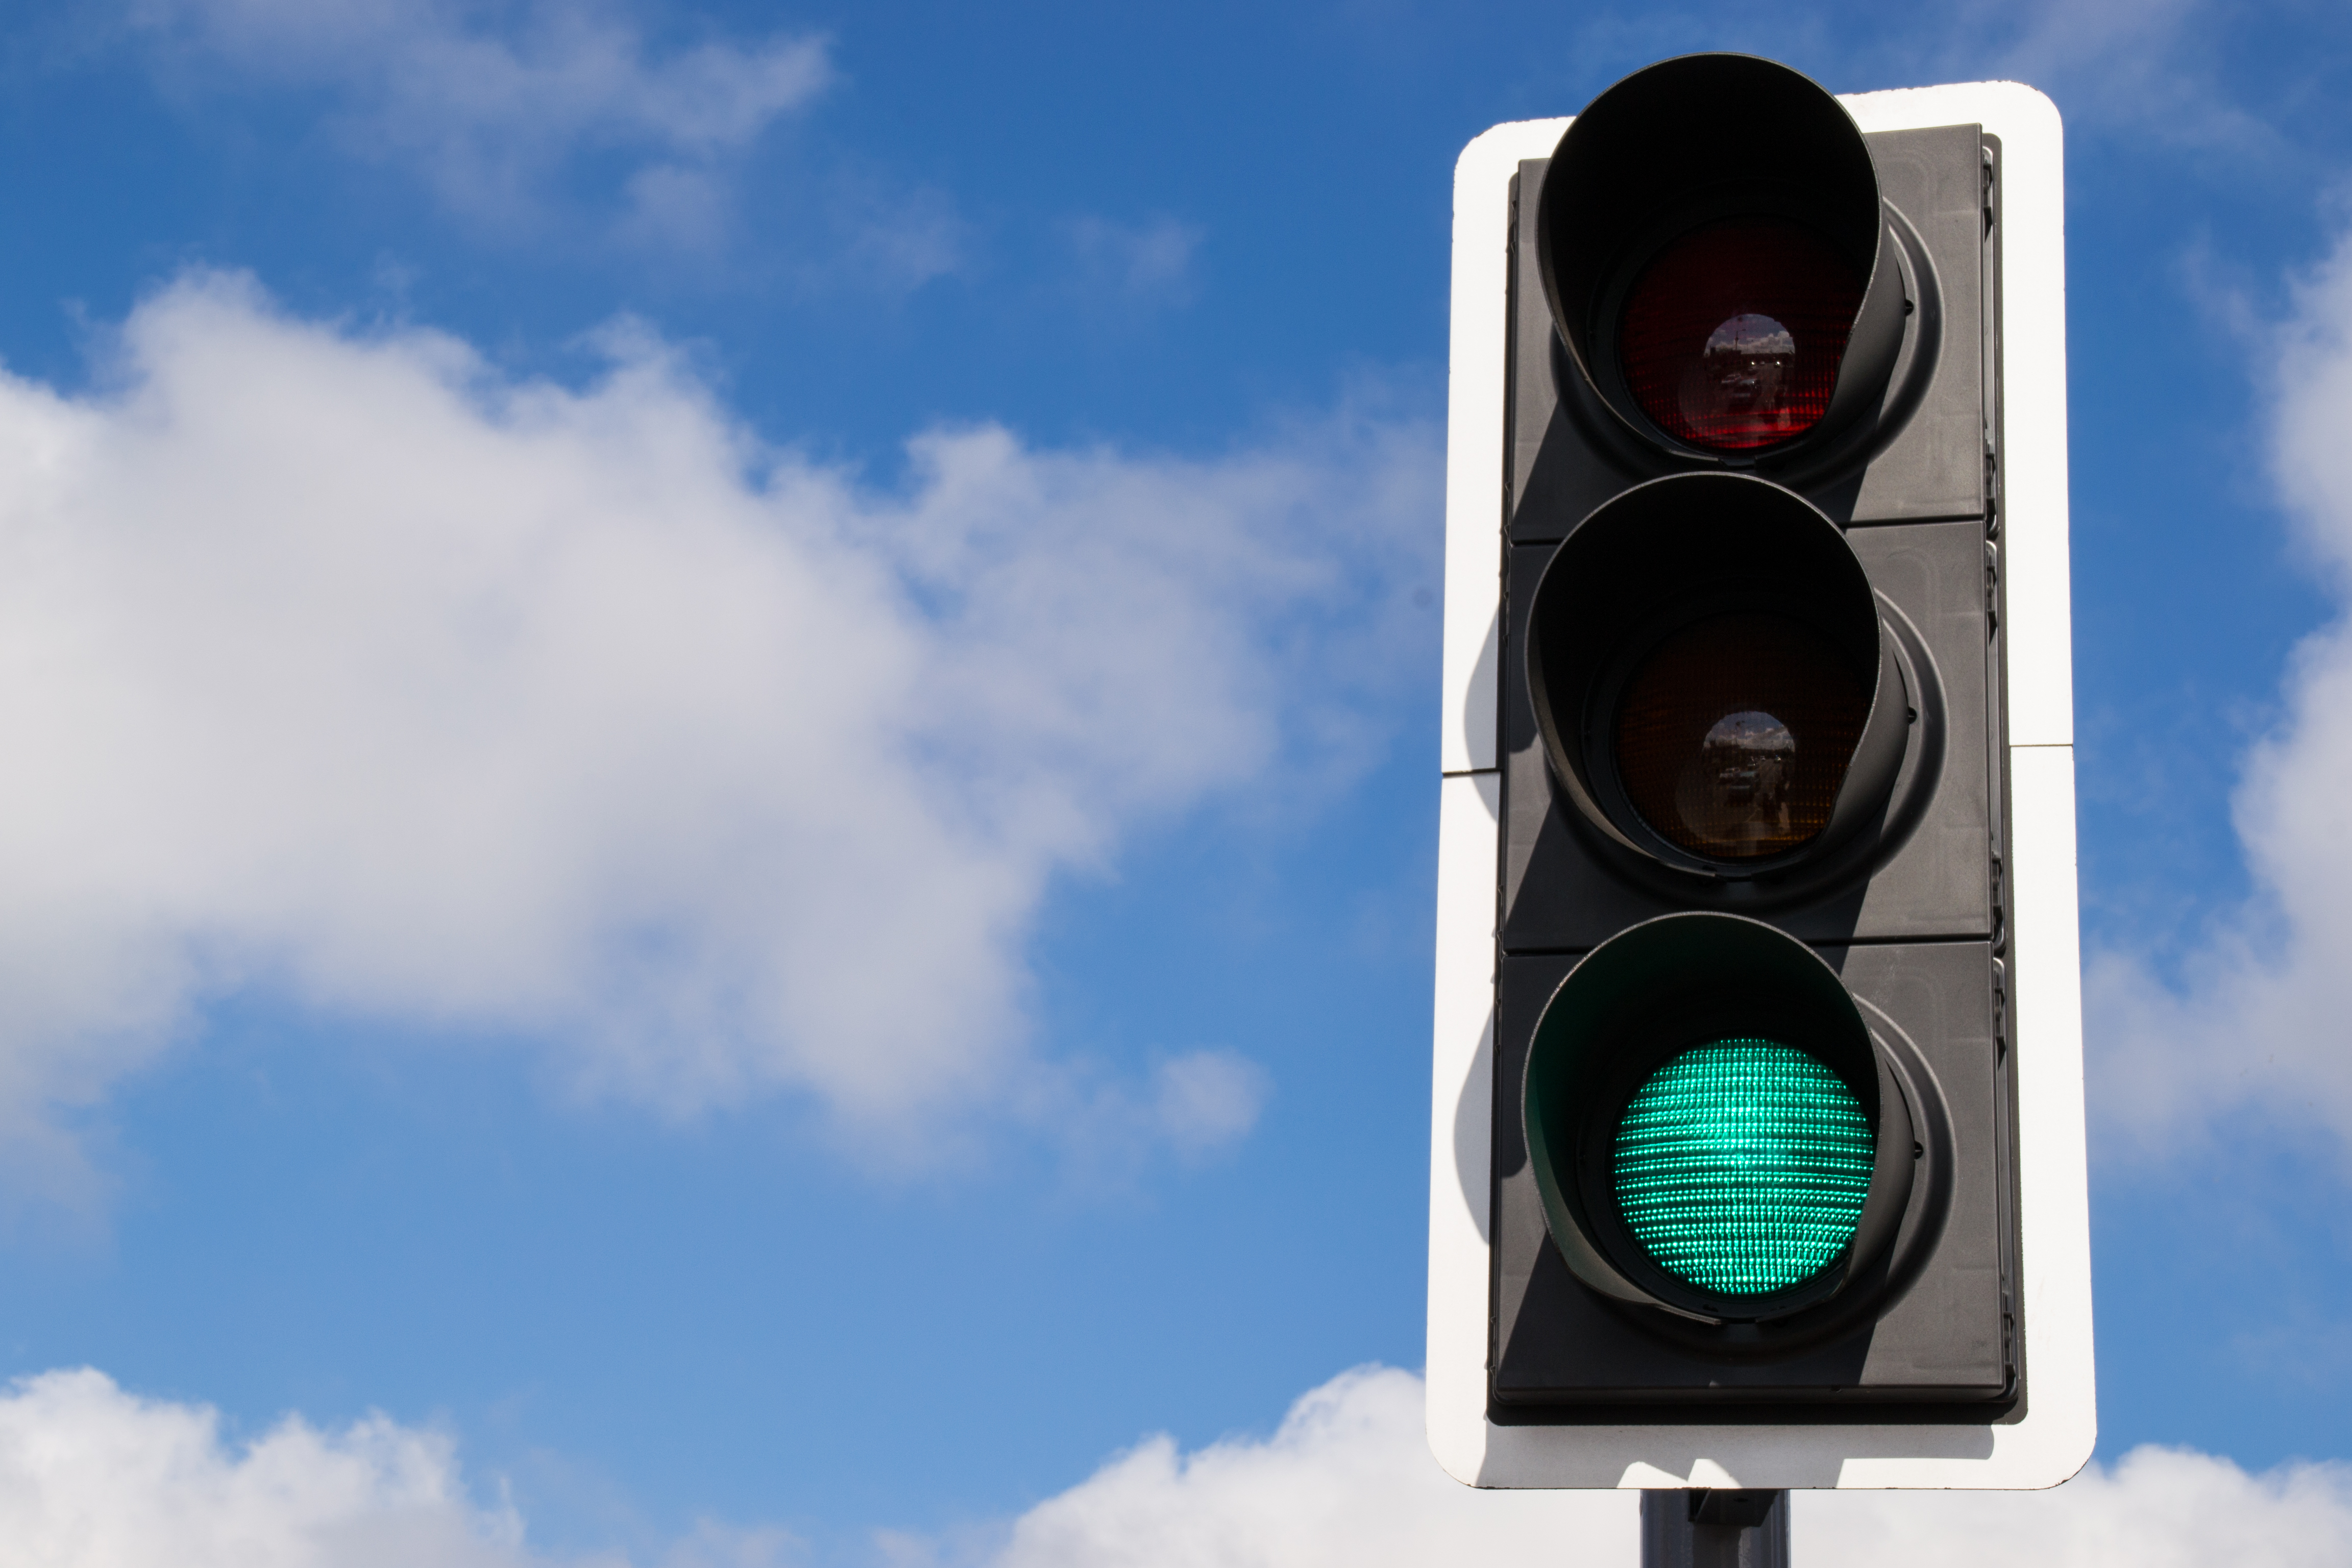 A green traffic light against a blue sky with a few fluffy white clouds. Image by Eddie J. Rodriquez via Shutterstock.